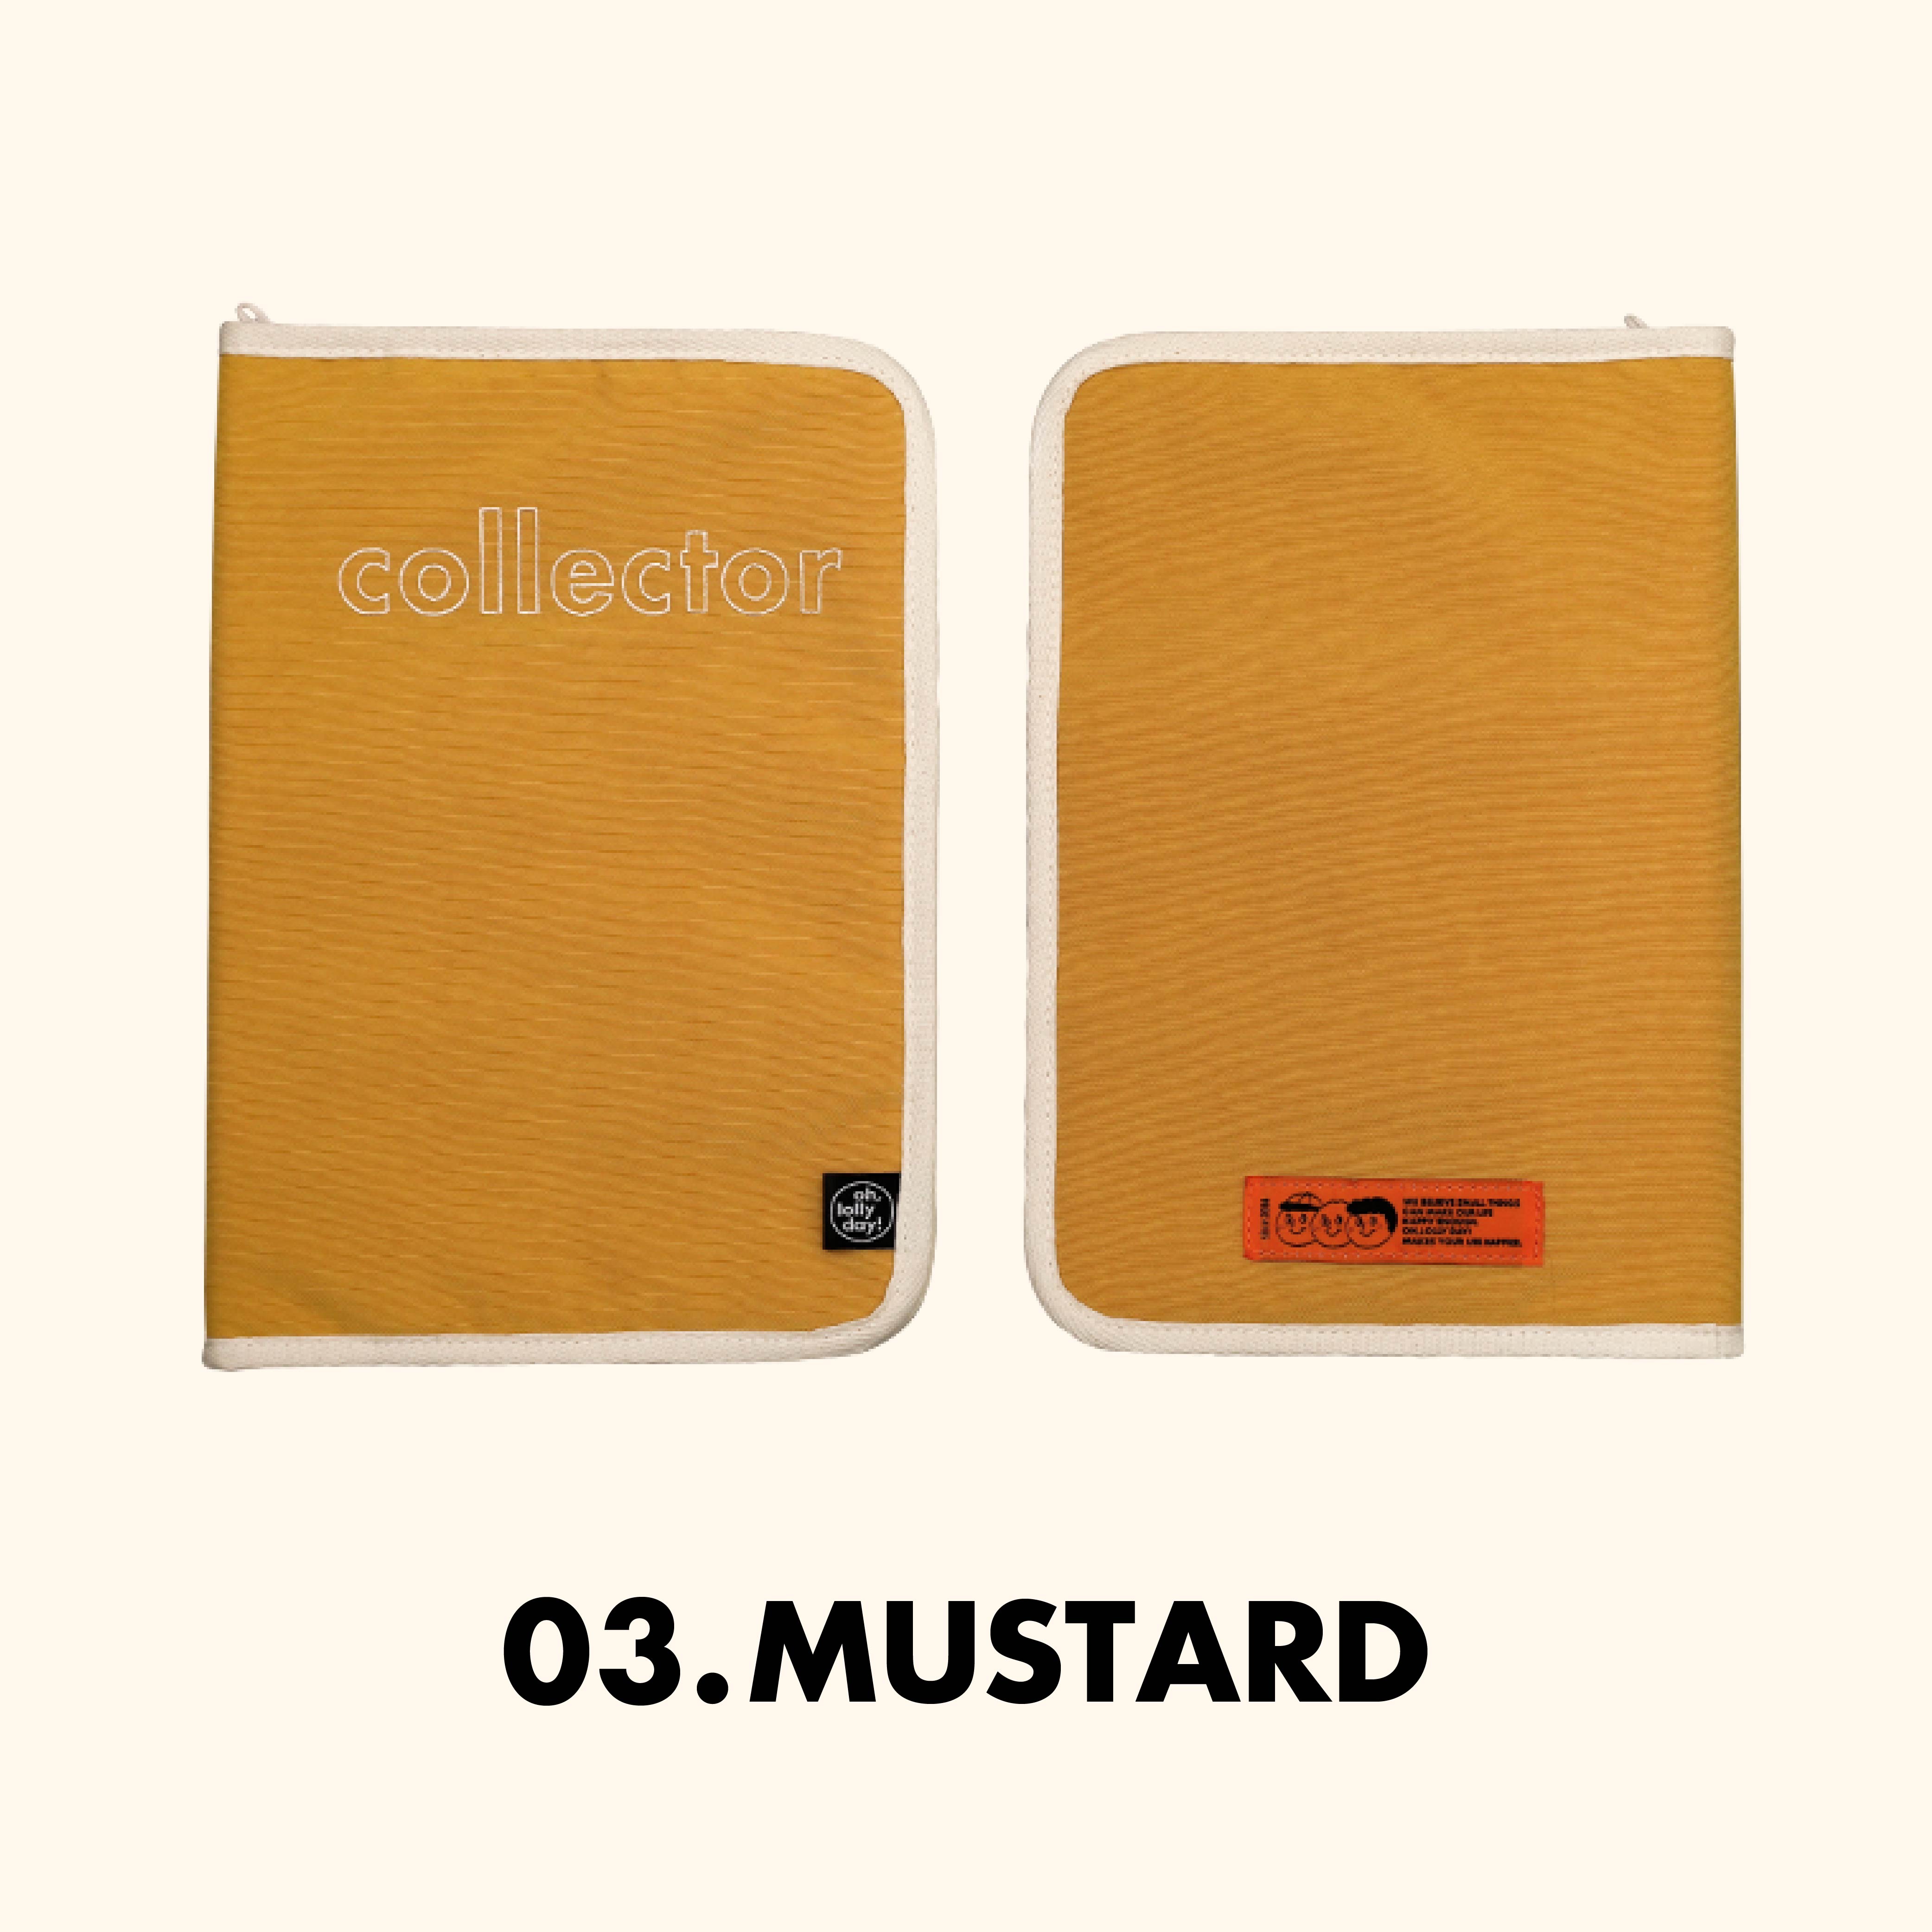 [Pouch] O,LD! Collector book pouch